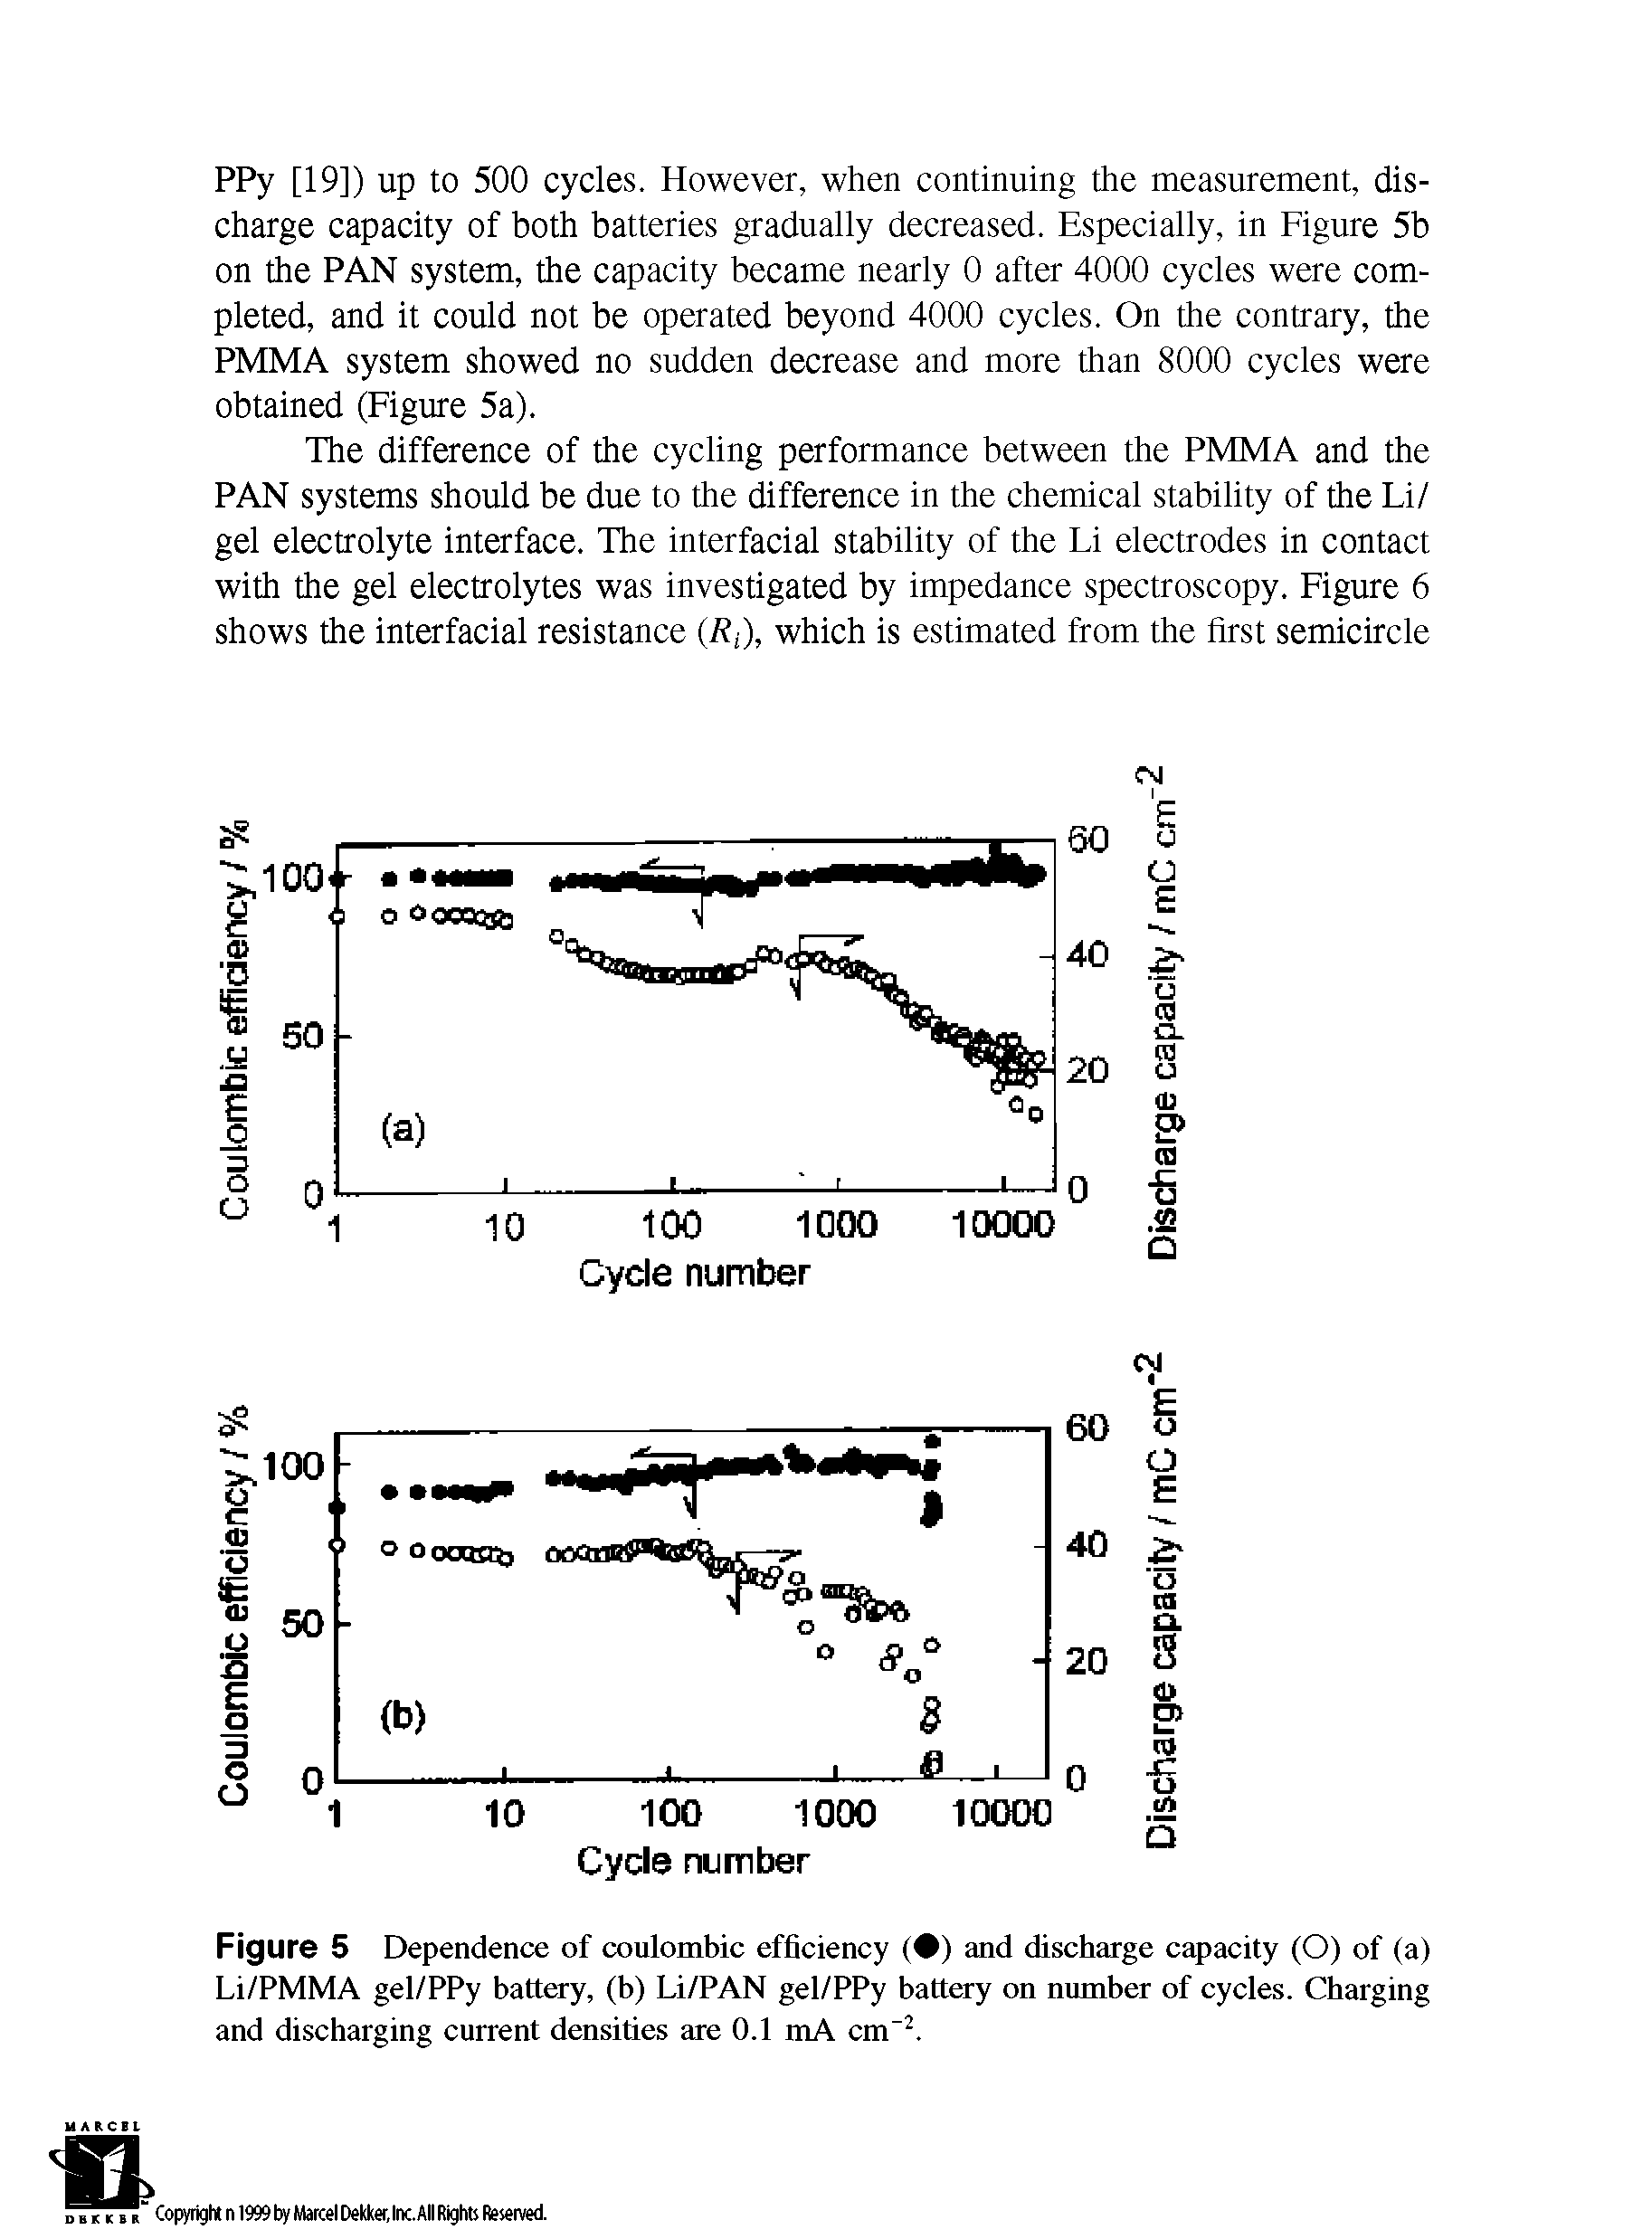 Figure 5 Dependence of coulombic efficiency ( ) and discharge capacity (O) of (a) Li/PMMA gel/PPy battery, (b) Li/PAN gel/PPy battery on number of cycles. Charging and discharging current densities are 0.1 mA cm-2.